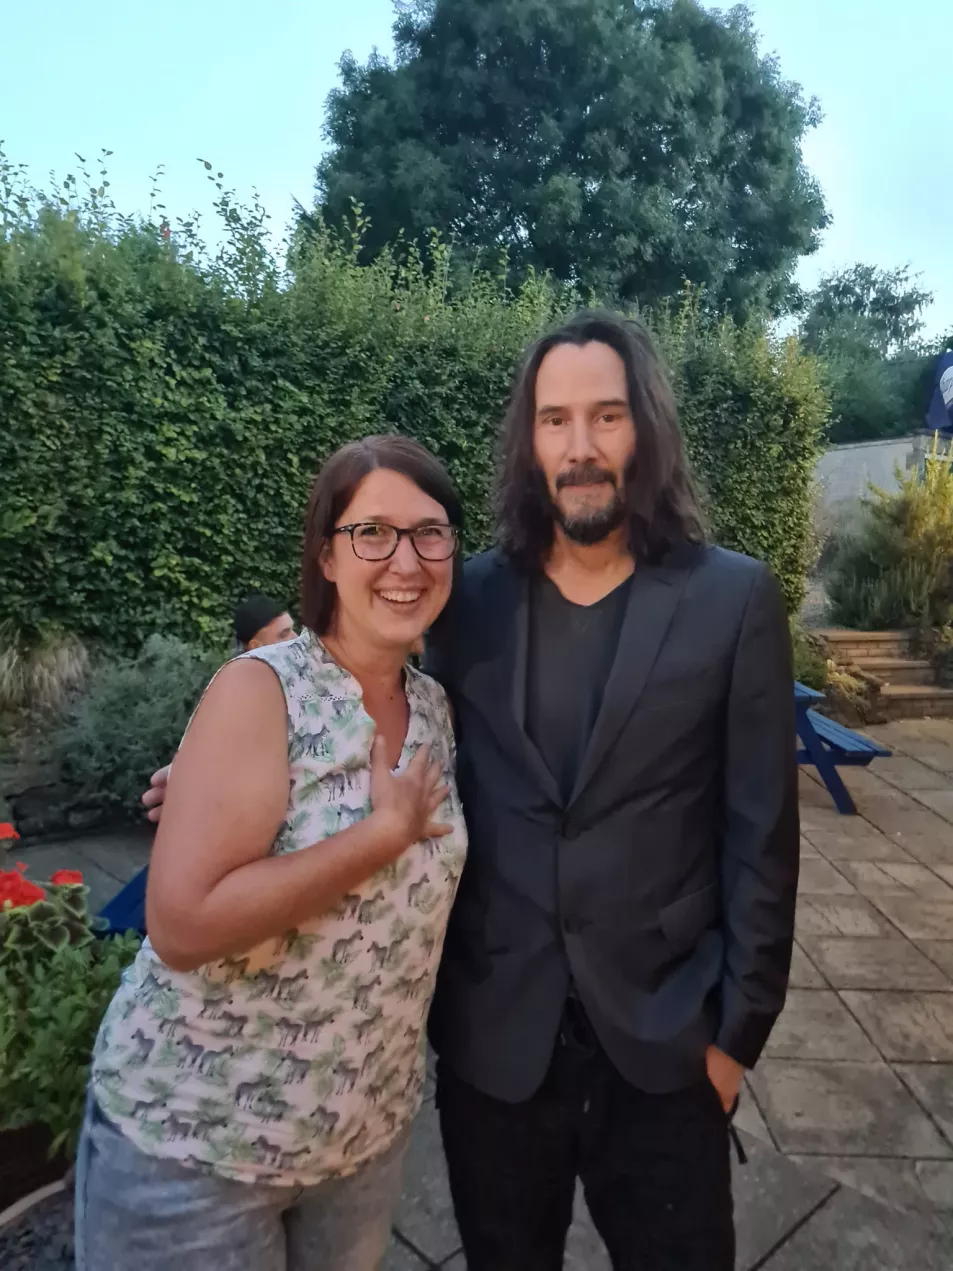 Dianne King, 46, poses with film star Keanu Reeves at her local pub. 